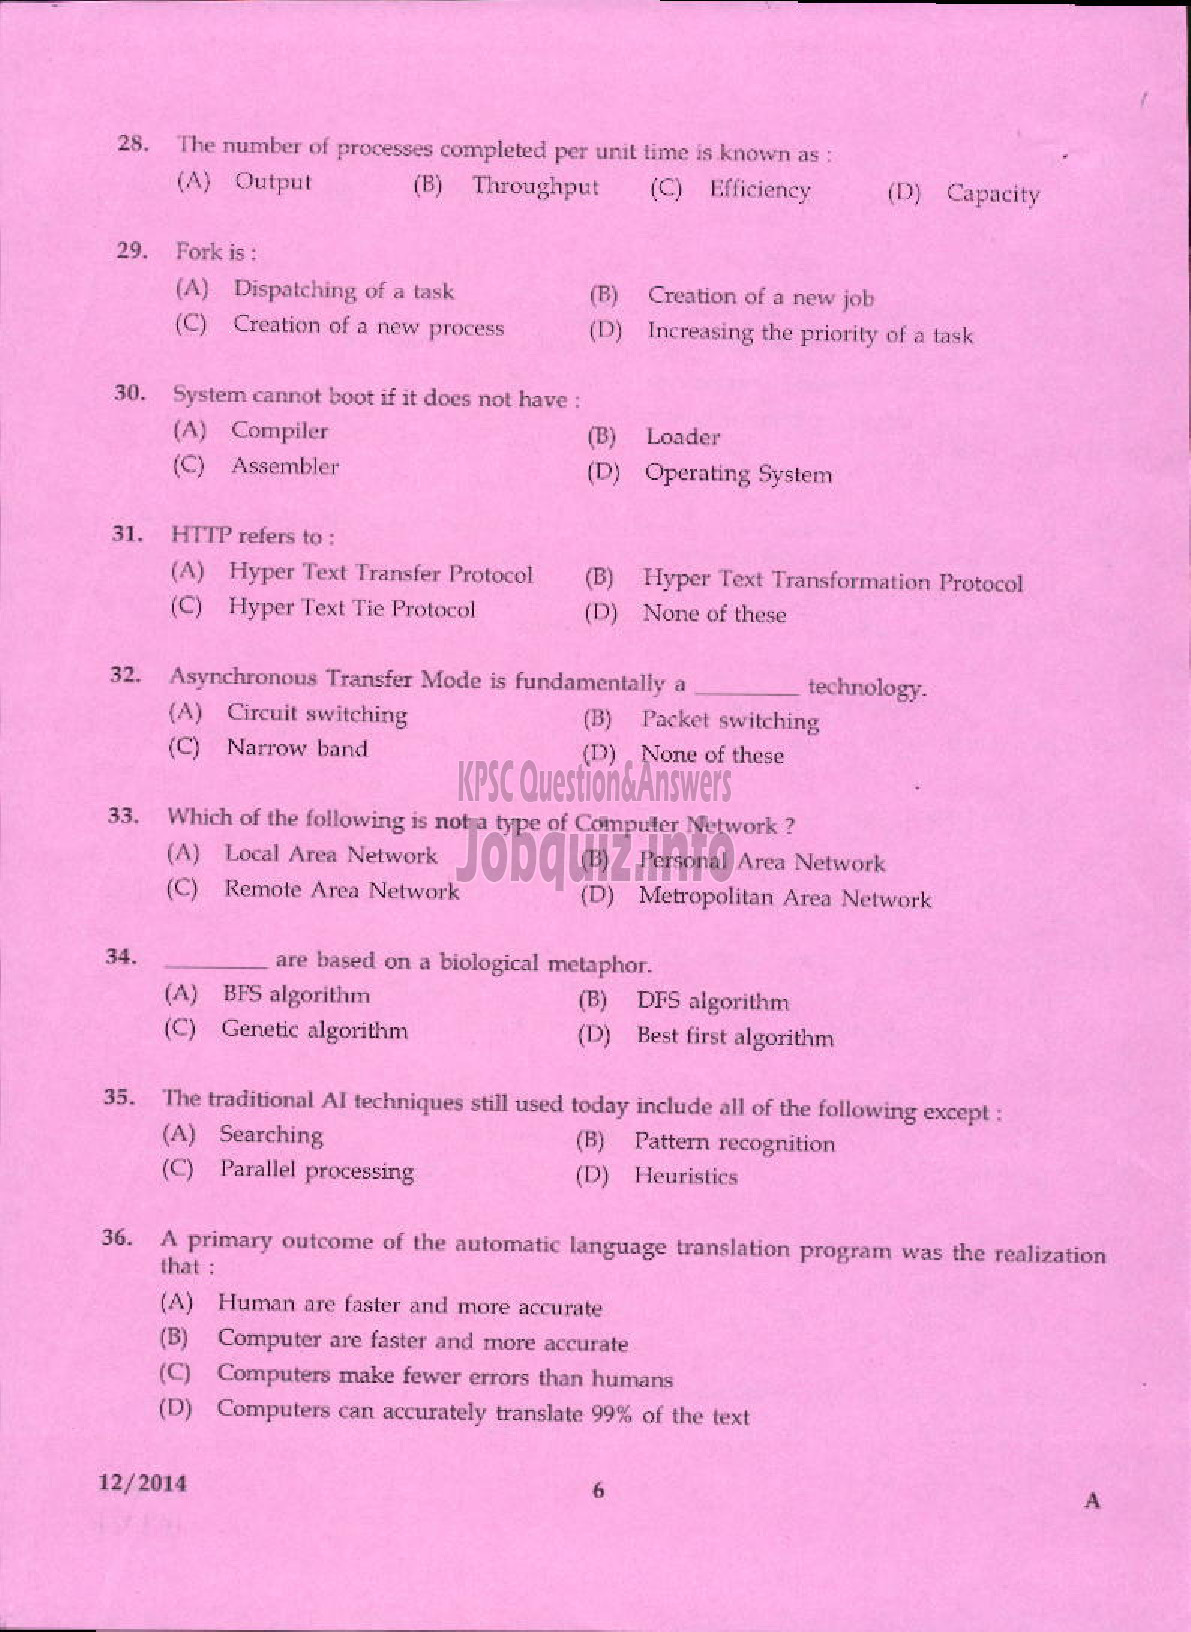 Kerala PSC Question Paper - VOCATIONAL INSTRUCTOR IN COMPUTER APPLICATION VHSE-4